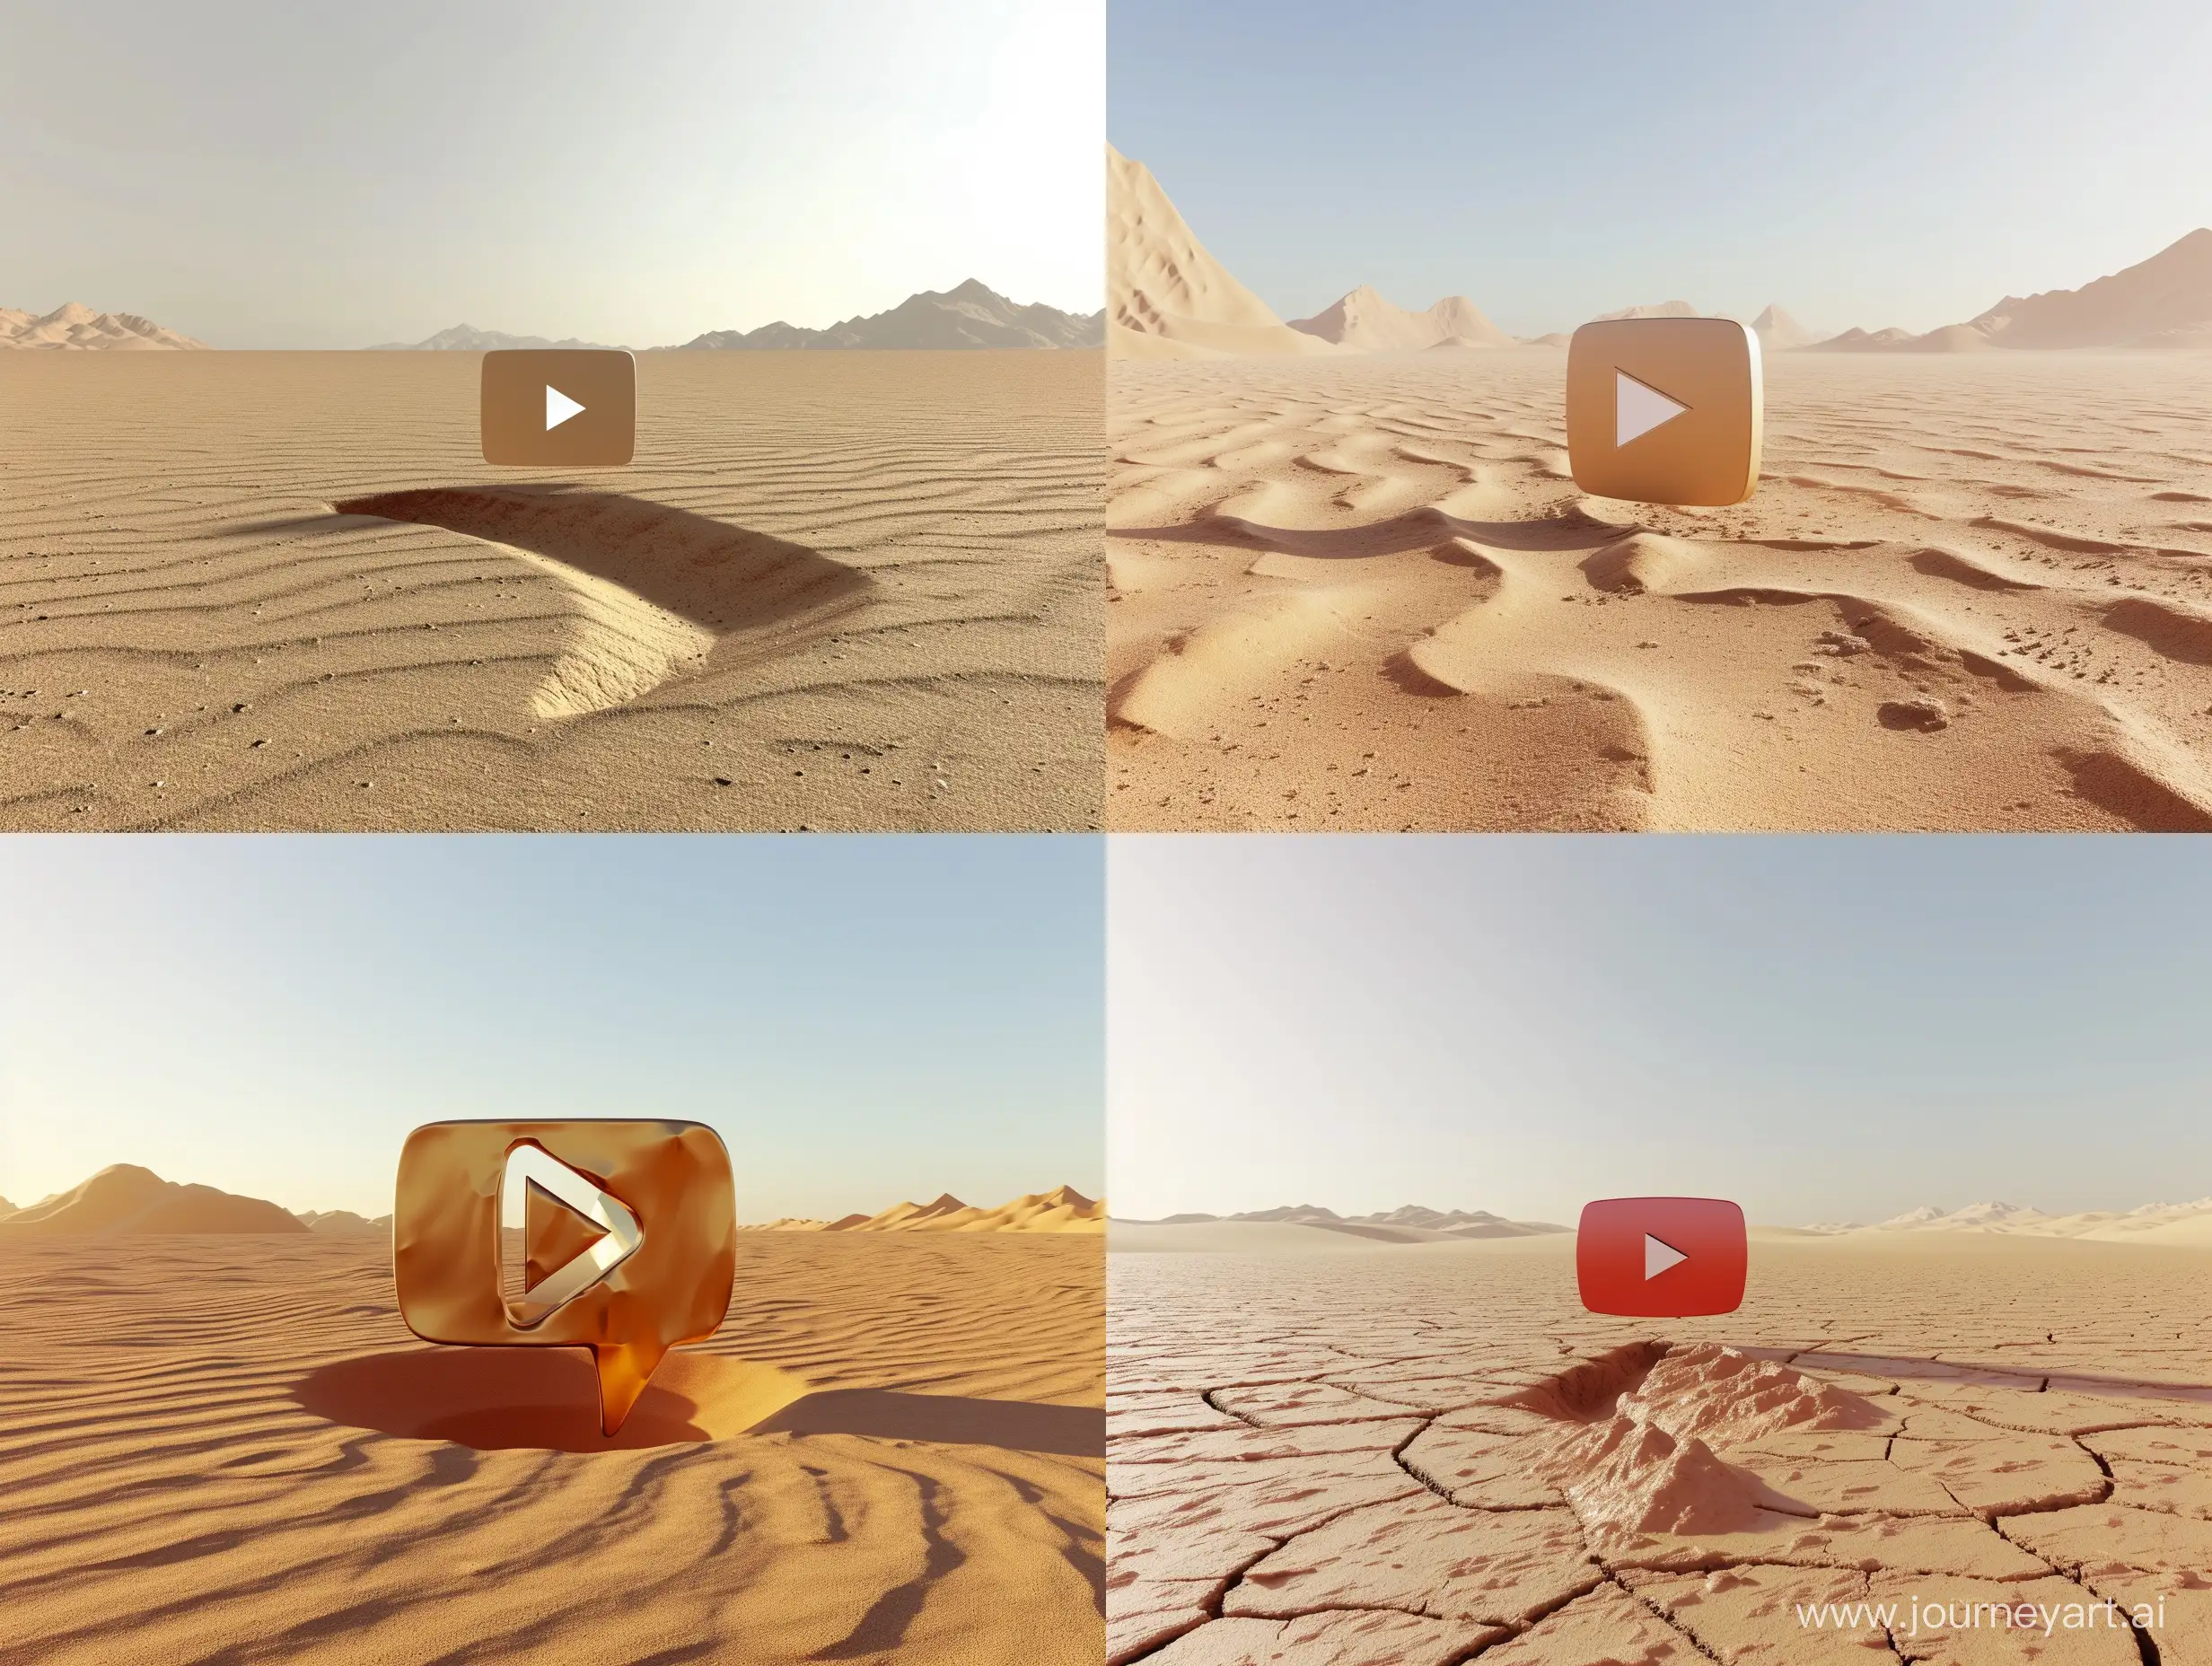 Imagine a desert. In the center, a 3D YouTube logo rises from the ground. Adjust image quality from 0-3, Set aspect ratio like3:2, Control strength of default Midjourney style